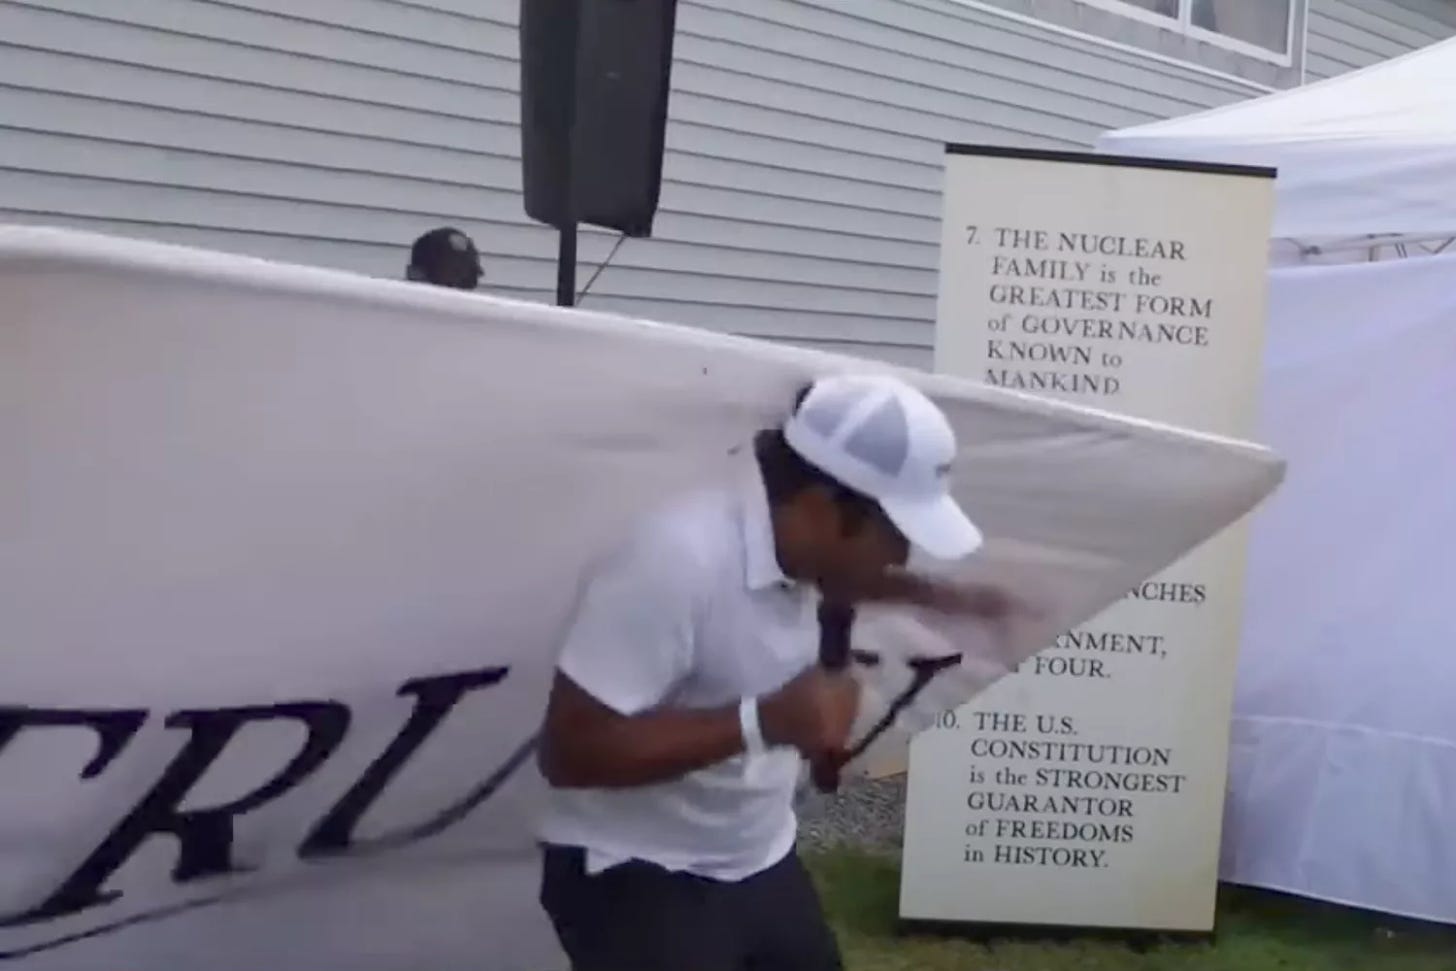 Vivek Ramaswamy's Campaign Speech Was Briefly Interrupted When a Sign Reading "Truth" Fell on Him